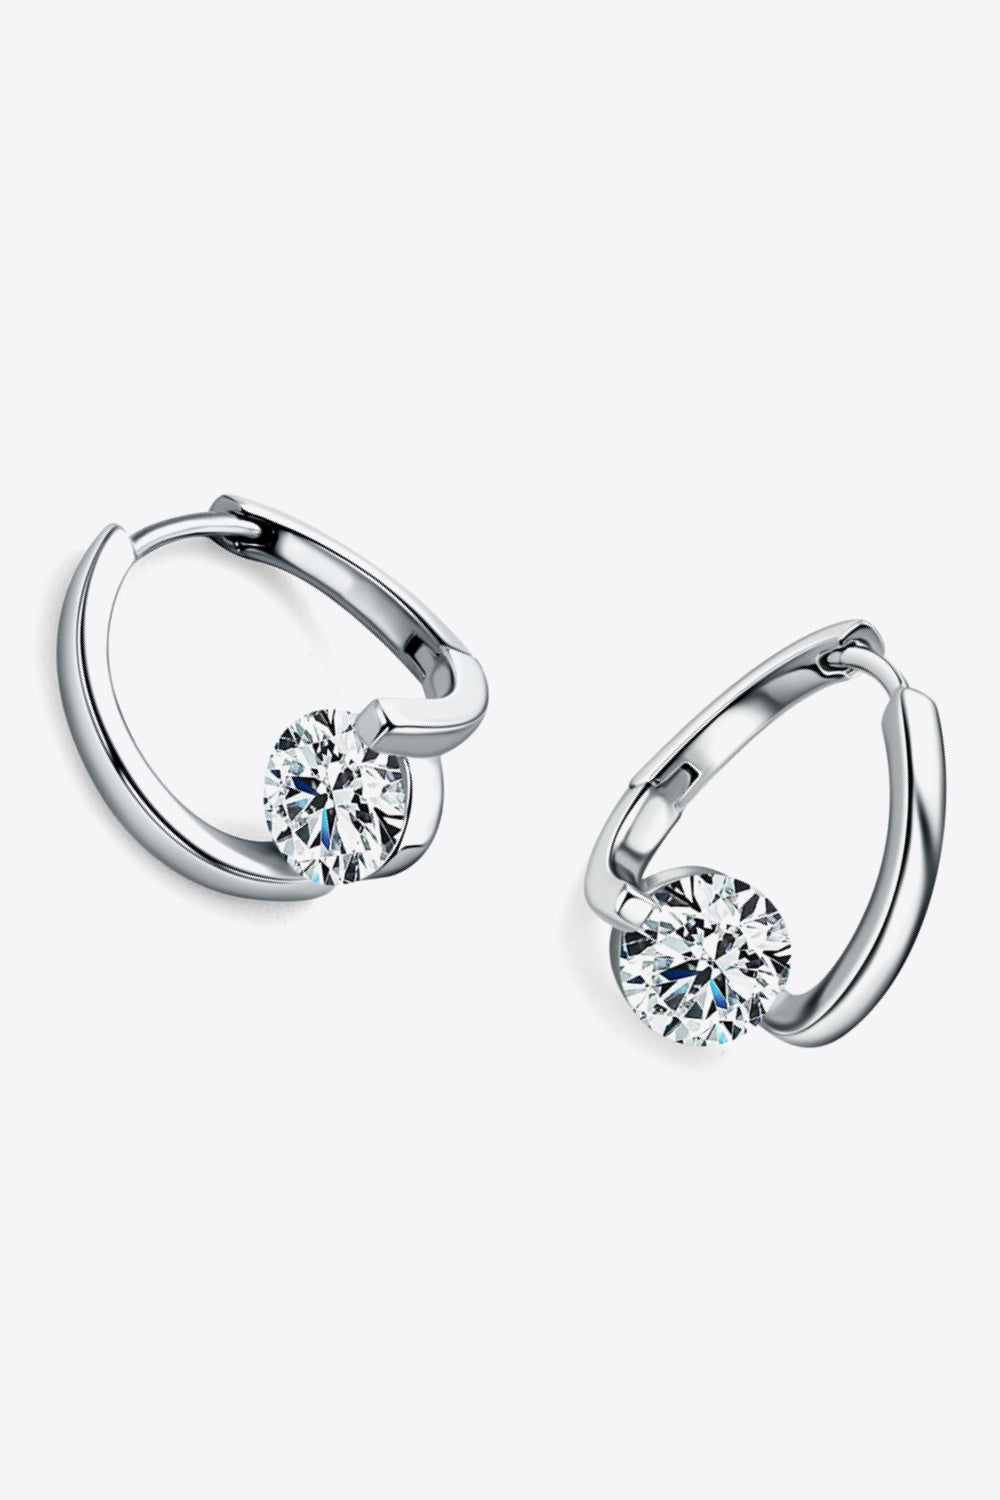 2 Carat Moissanite 925 Sterling Silver Heart Earrings-Earrings-Inspired by Justeen-Women's Clothing Boutique in Chicago, Illinois